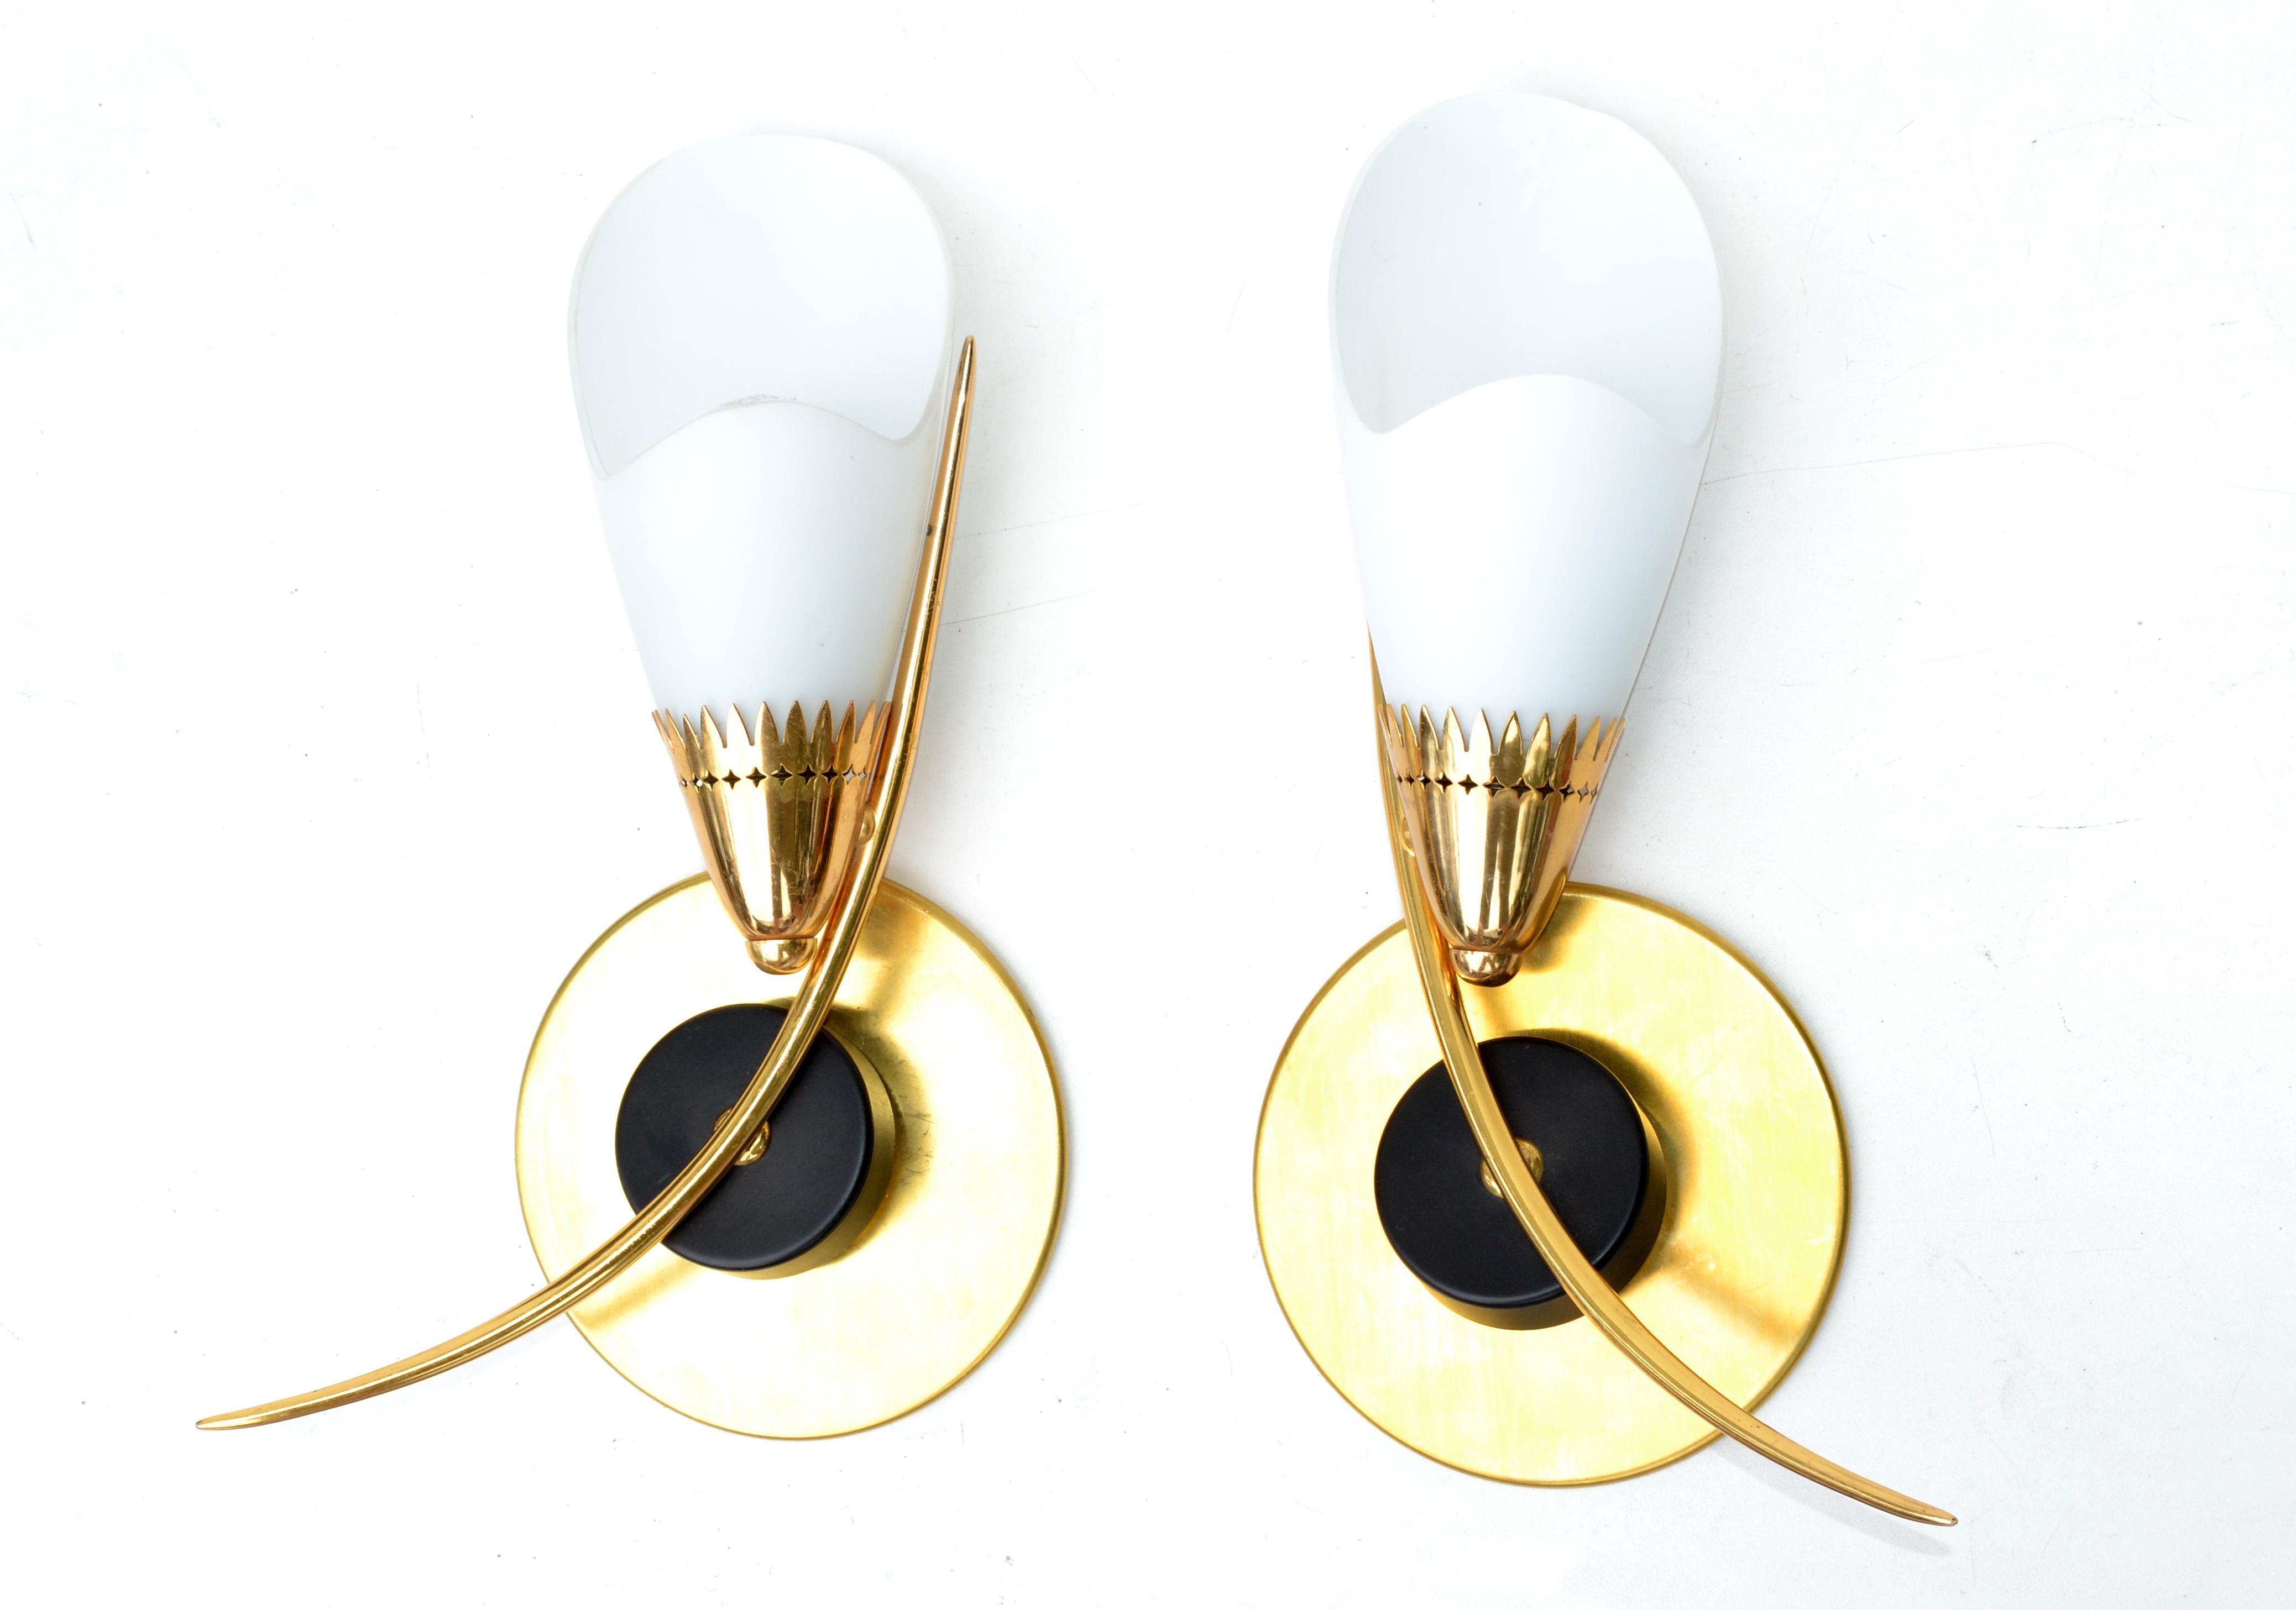 Maison Lunel Mirror Image Sconces Brass Steel & Opaline Shade France 1960, Pair In Good Condition For Sale In Miami, FL